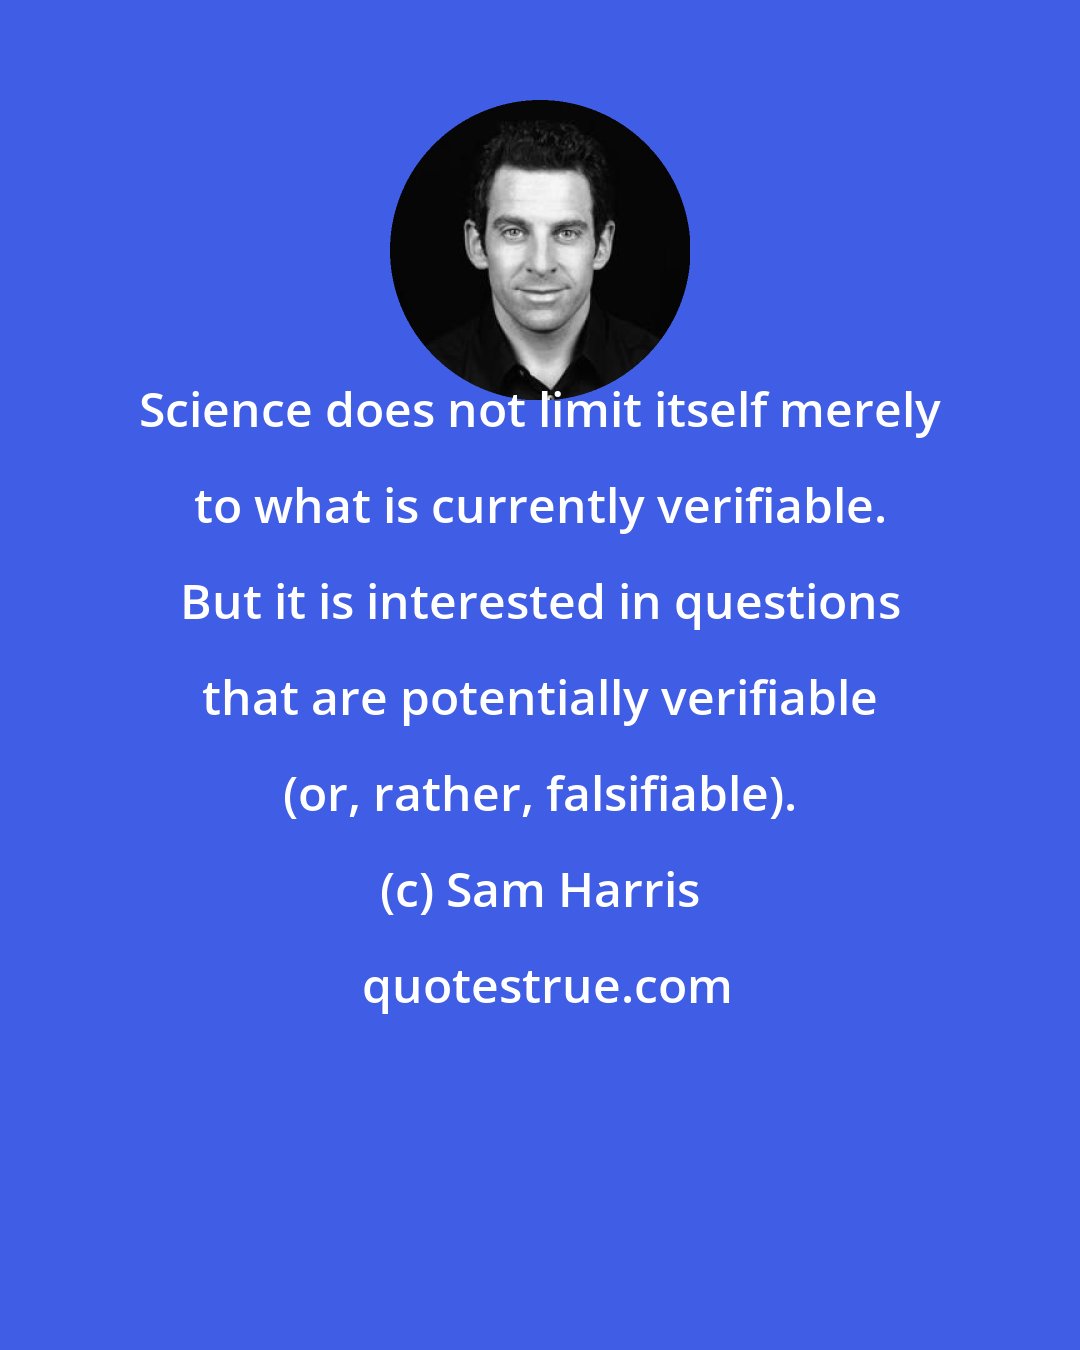 Sam Harris: Science does not limit itself merely to what is currently verifiable. But it is interested in questions that are potentially verifiable (or, rather, falsifiable).